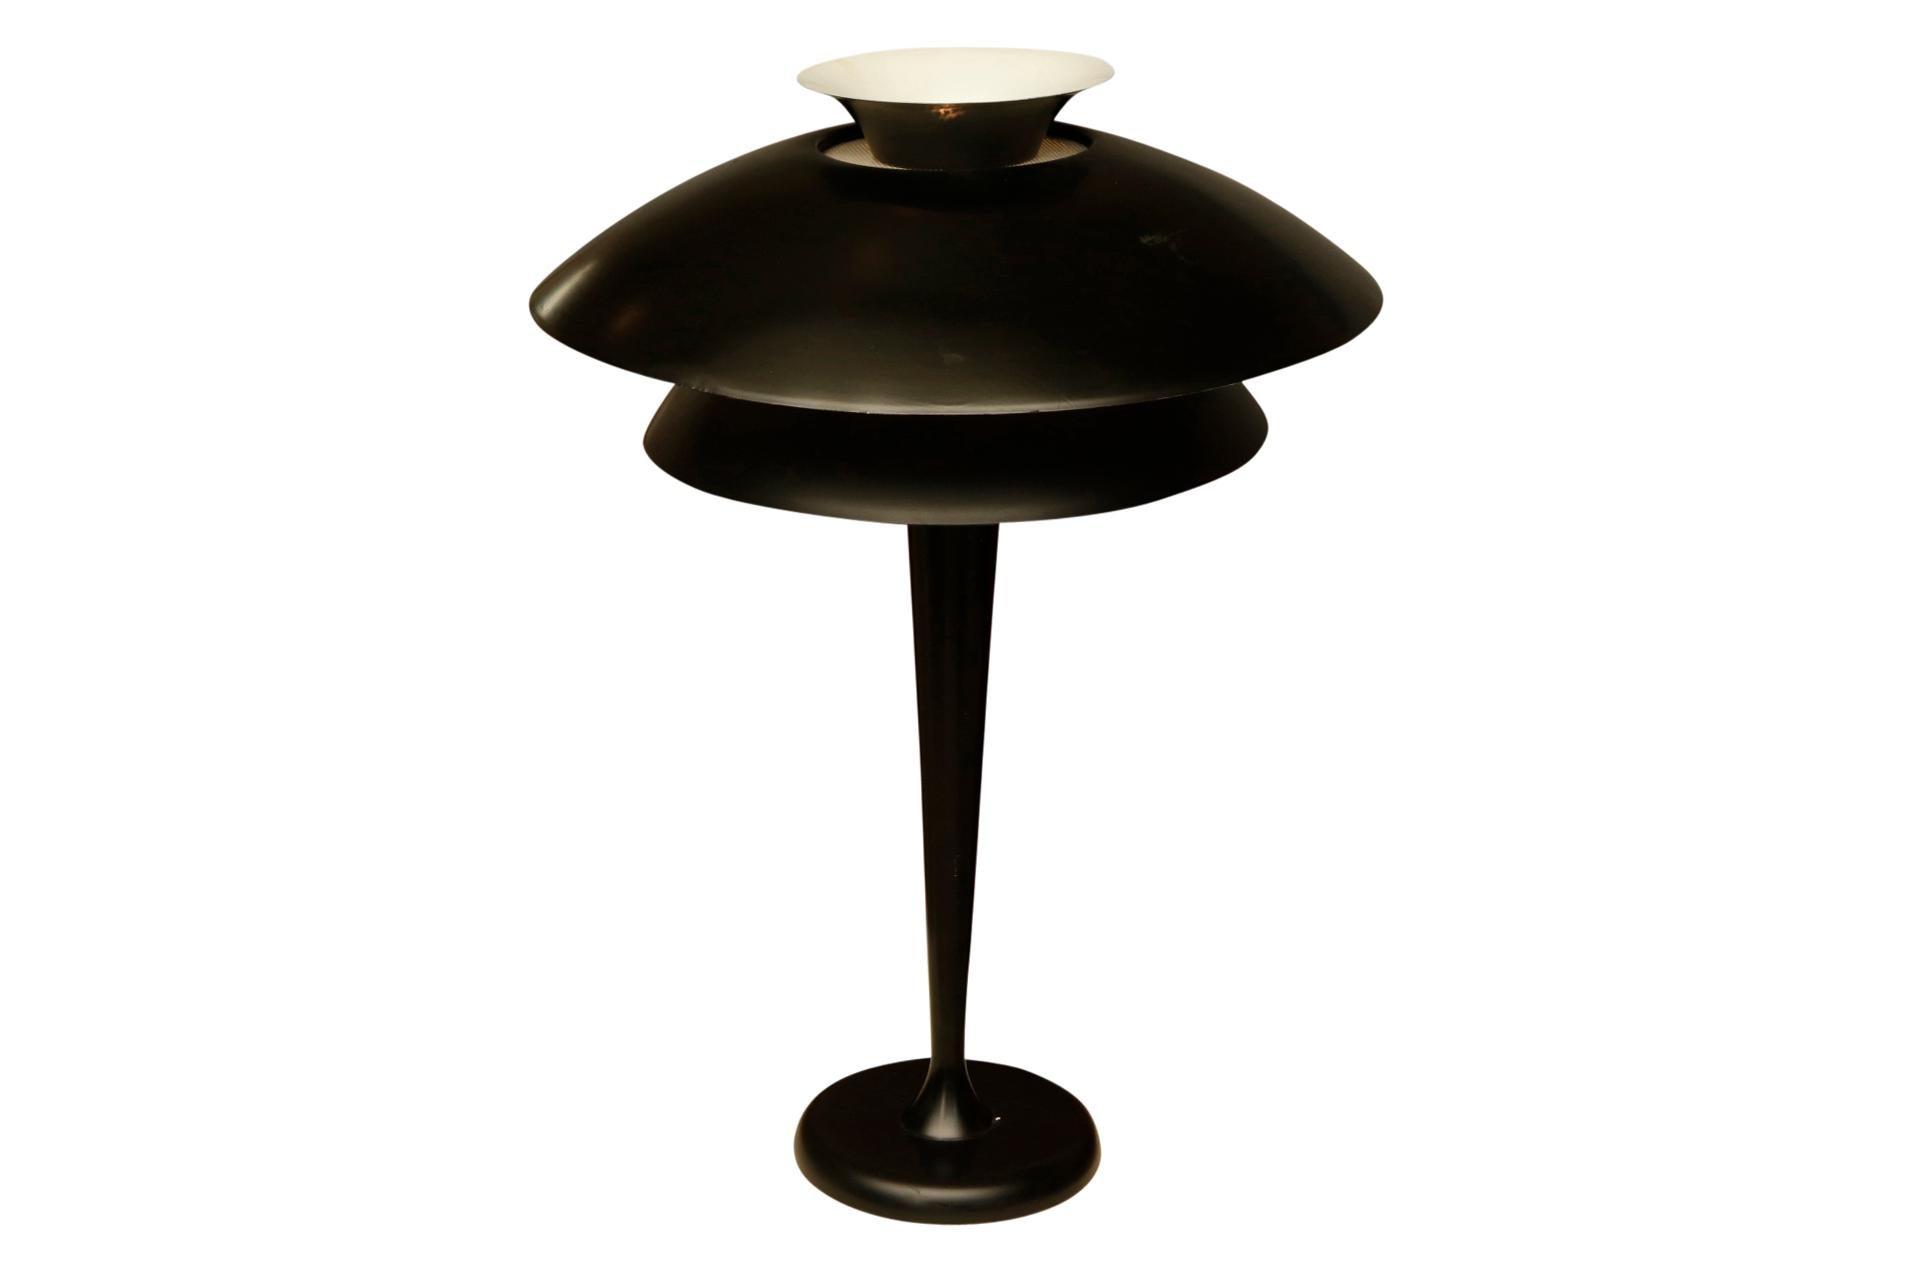 This Striking 29 inch tall lamp is created in 